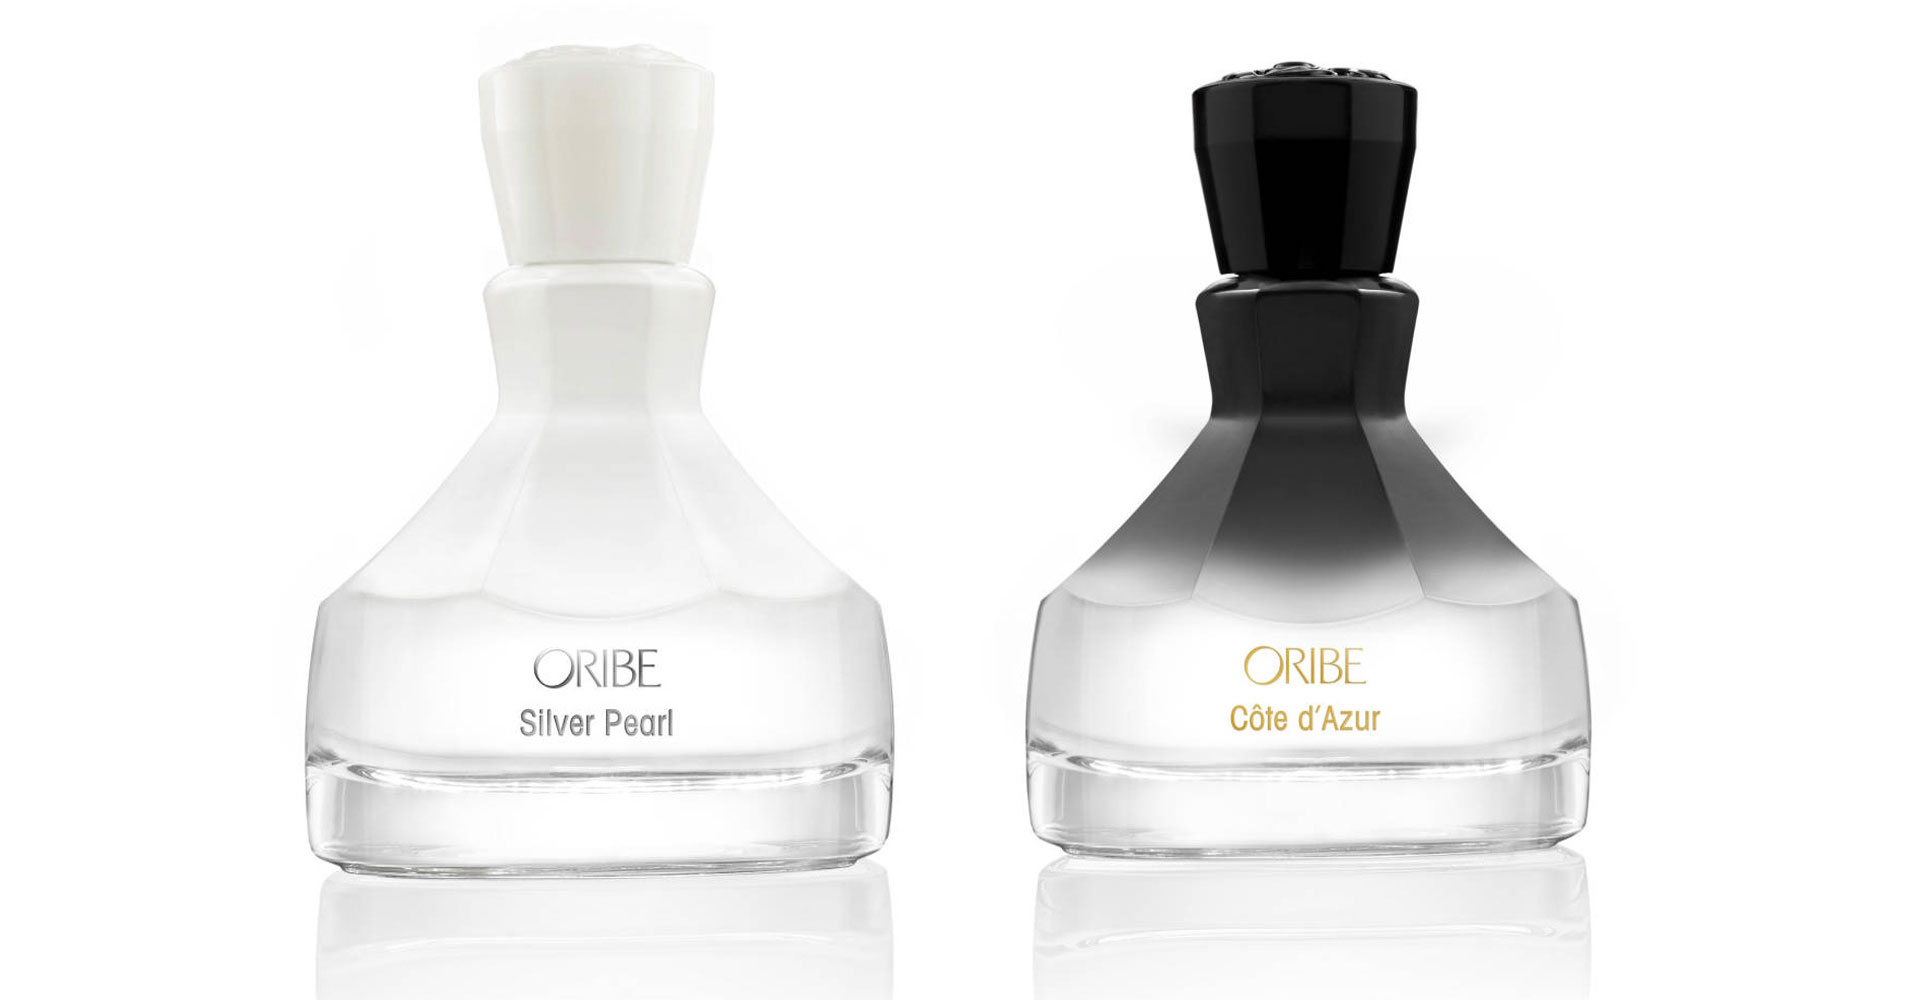 This is the best gaming set I have tried so far! oribe silver pearl perfume...